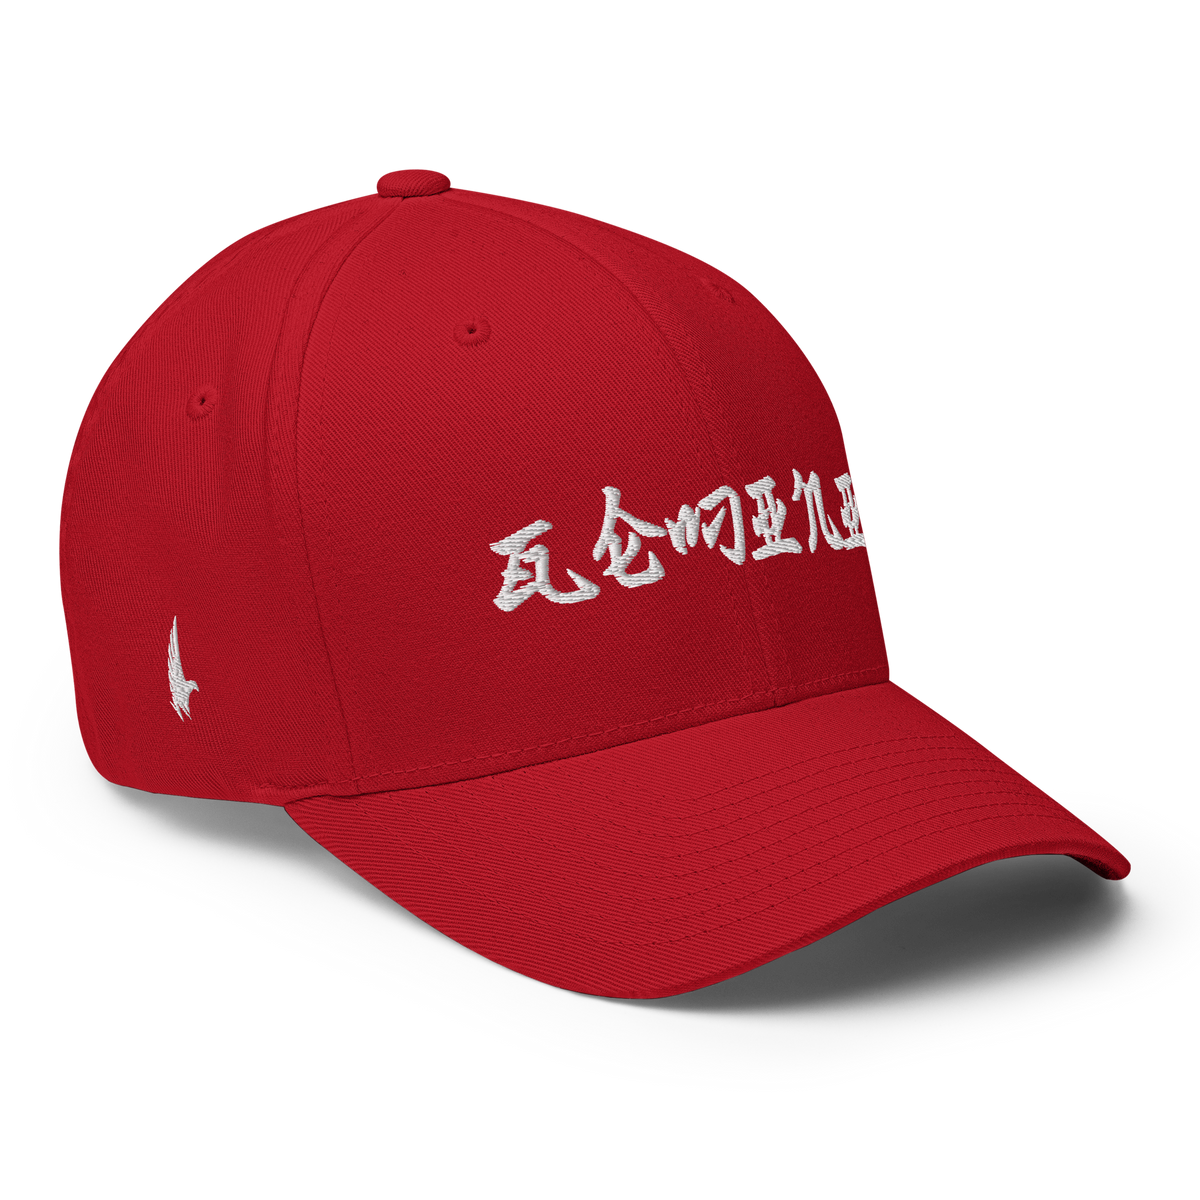 Gemini Rising Fitted Hat Red White - Loyalty Vibes